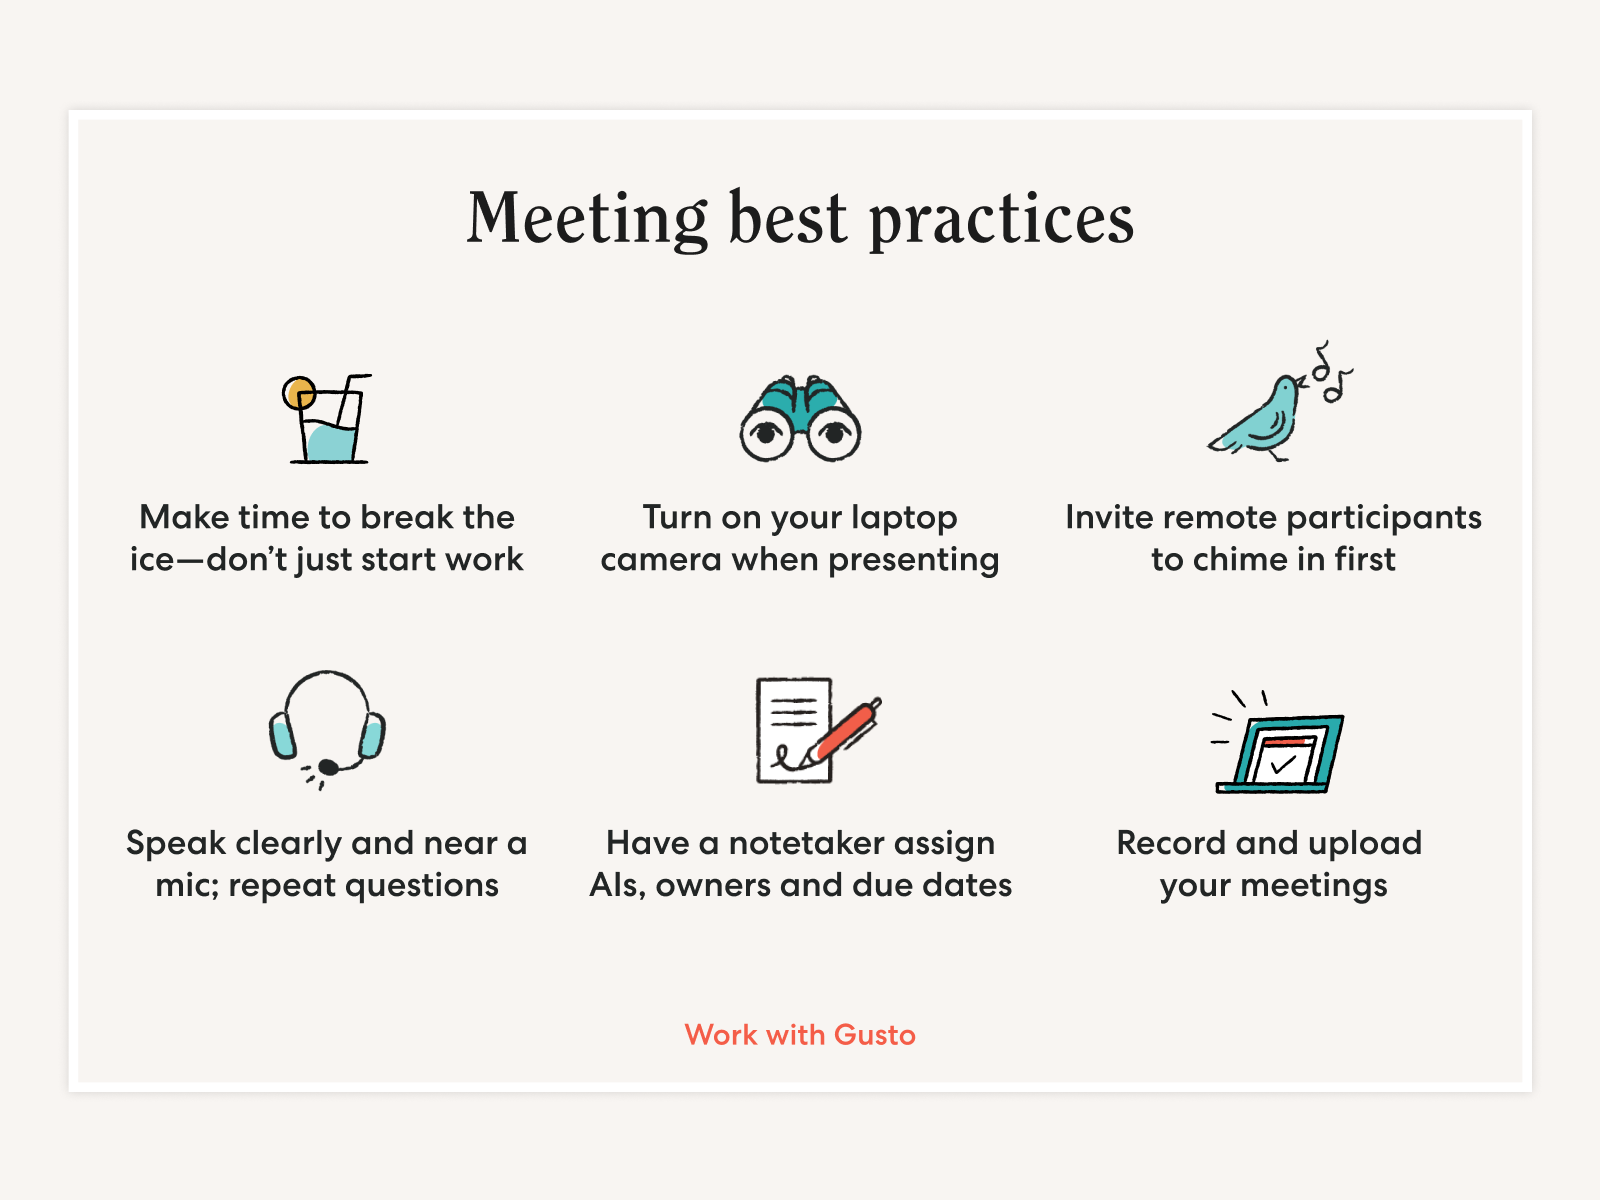 Best practices for meetings inclusion illustration design collaborative remote distributed work meetings teamwork distributed collaboration remote work